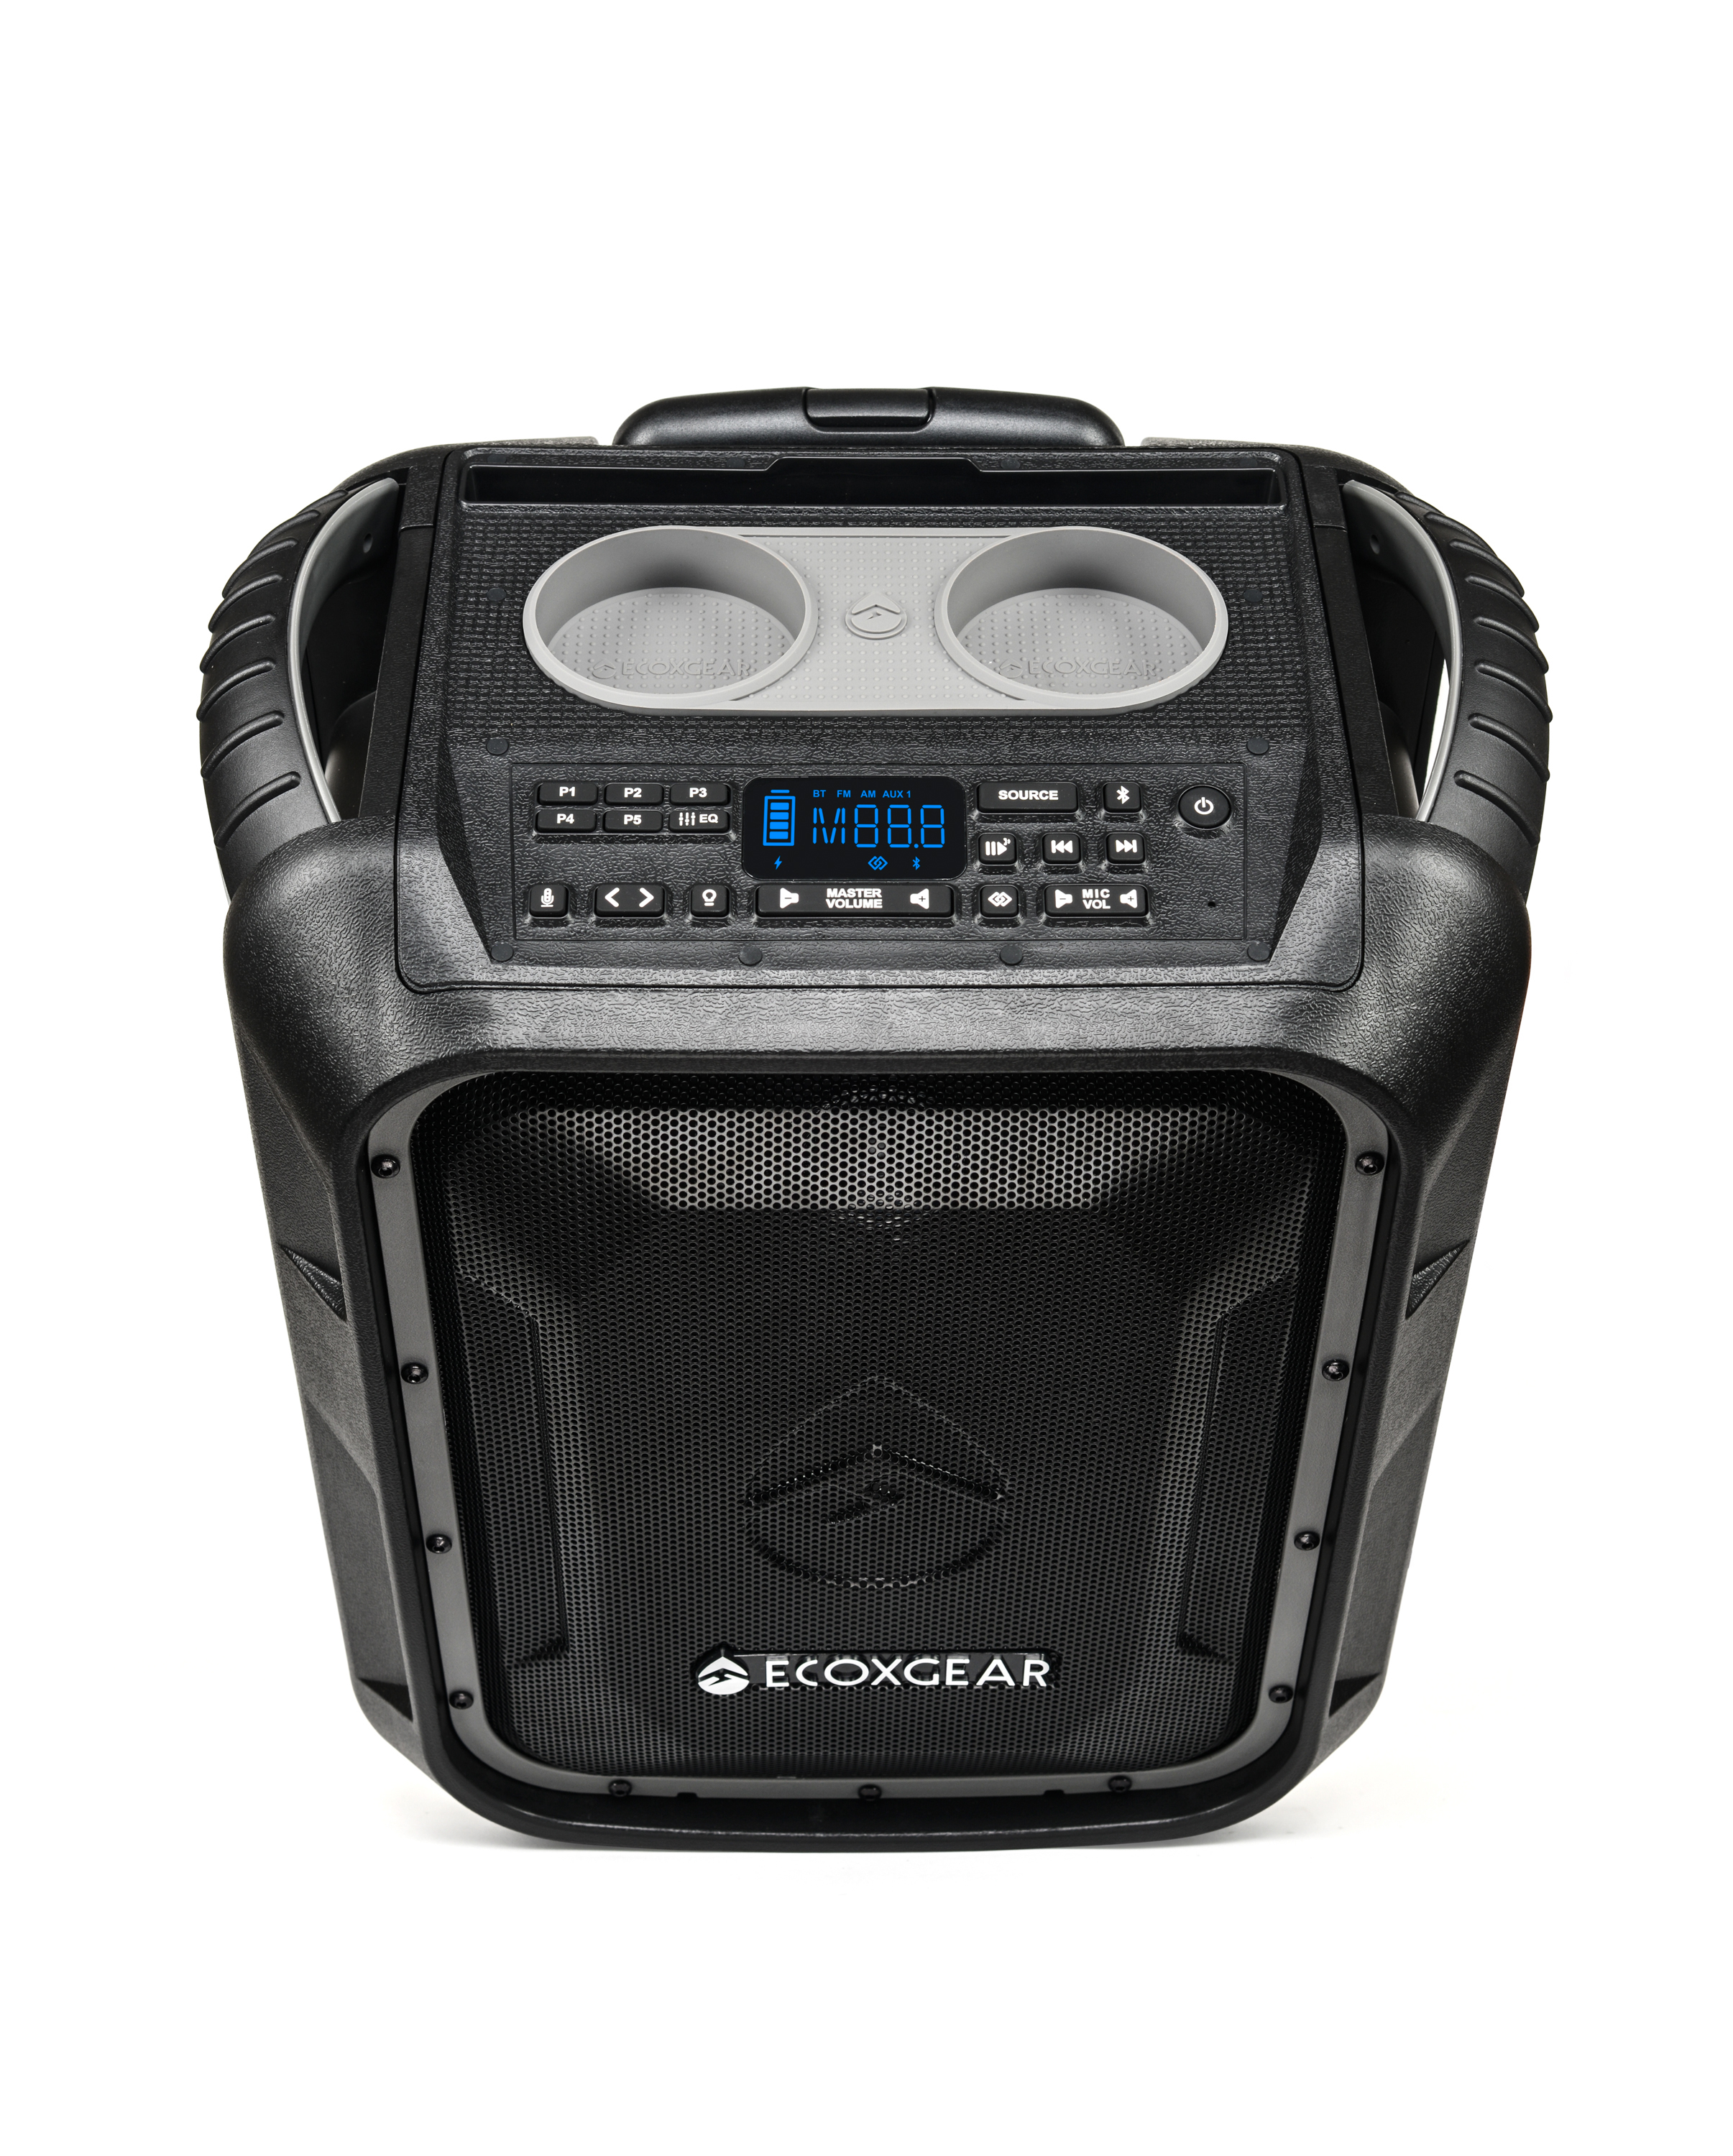 EcoXGear EcoBoulder+ Grey 20" x 15" x 12" EcoBoulder+ Black Outdoor Waterproof, Shockproof, Fully Submersible 100W 12 Hour Playing time Bluetooth Speakers - image 2 of 6